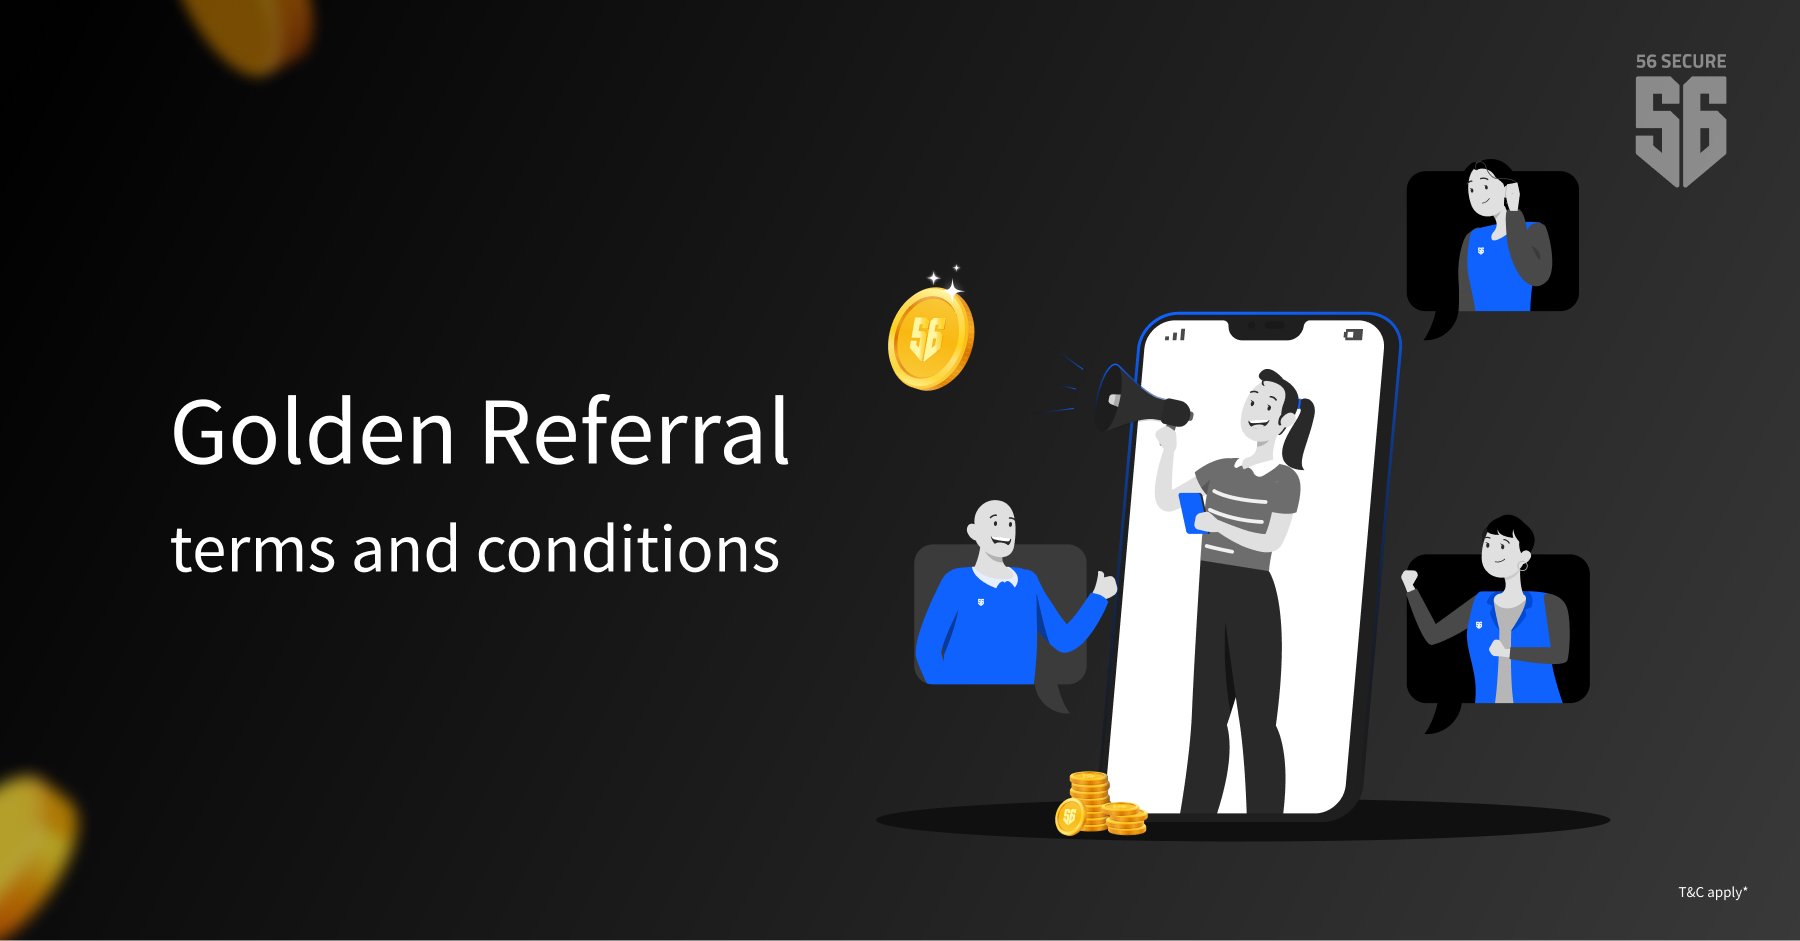 GoldenReferral terms and conditions